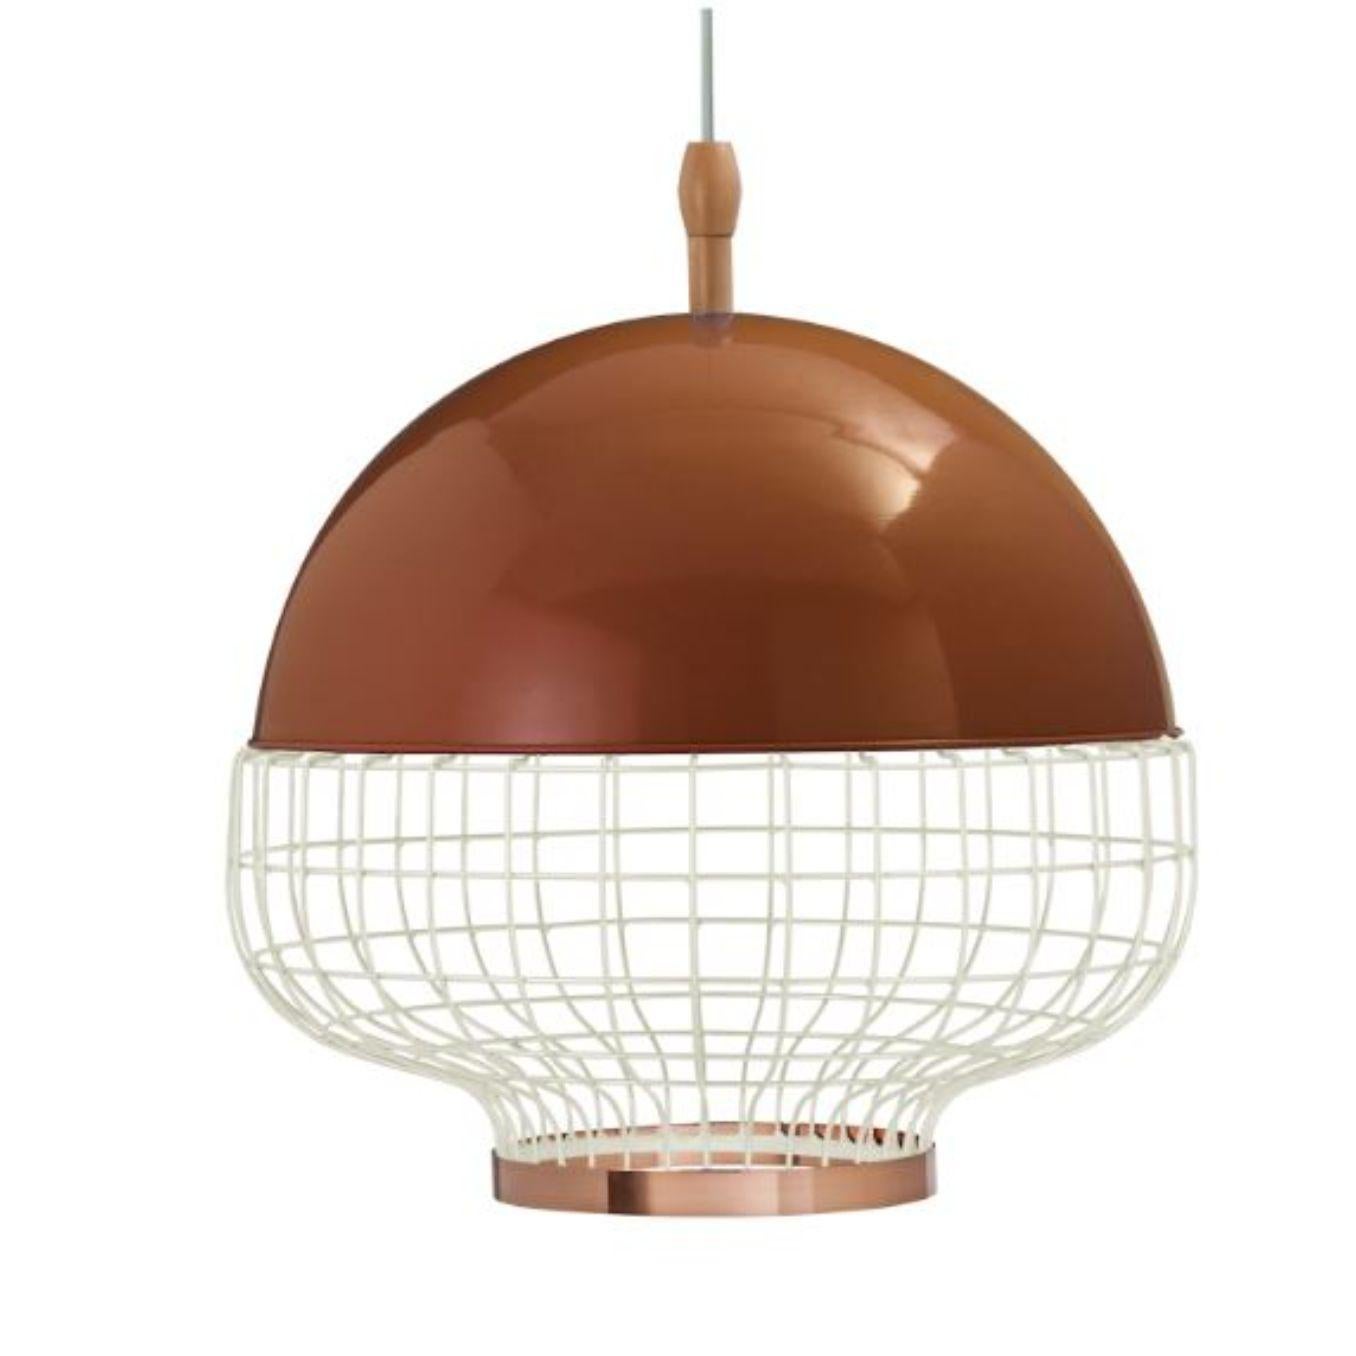 Copper magnolia I suspension lamp with copper ring by Dooq.
Dimensions: W 65 x D 65 x H 57 cm.
Materials: lacquered metal, polished or brushed metal, copper.
Also available in different colours and materials.

Information:
230V/50Hz
E27/1x20W